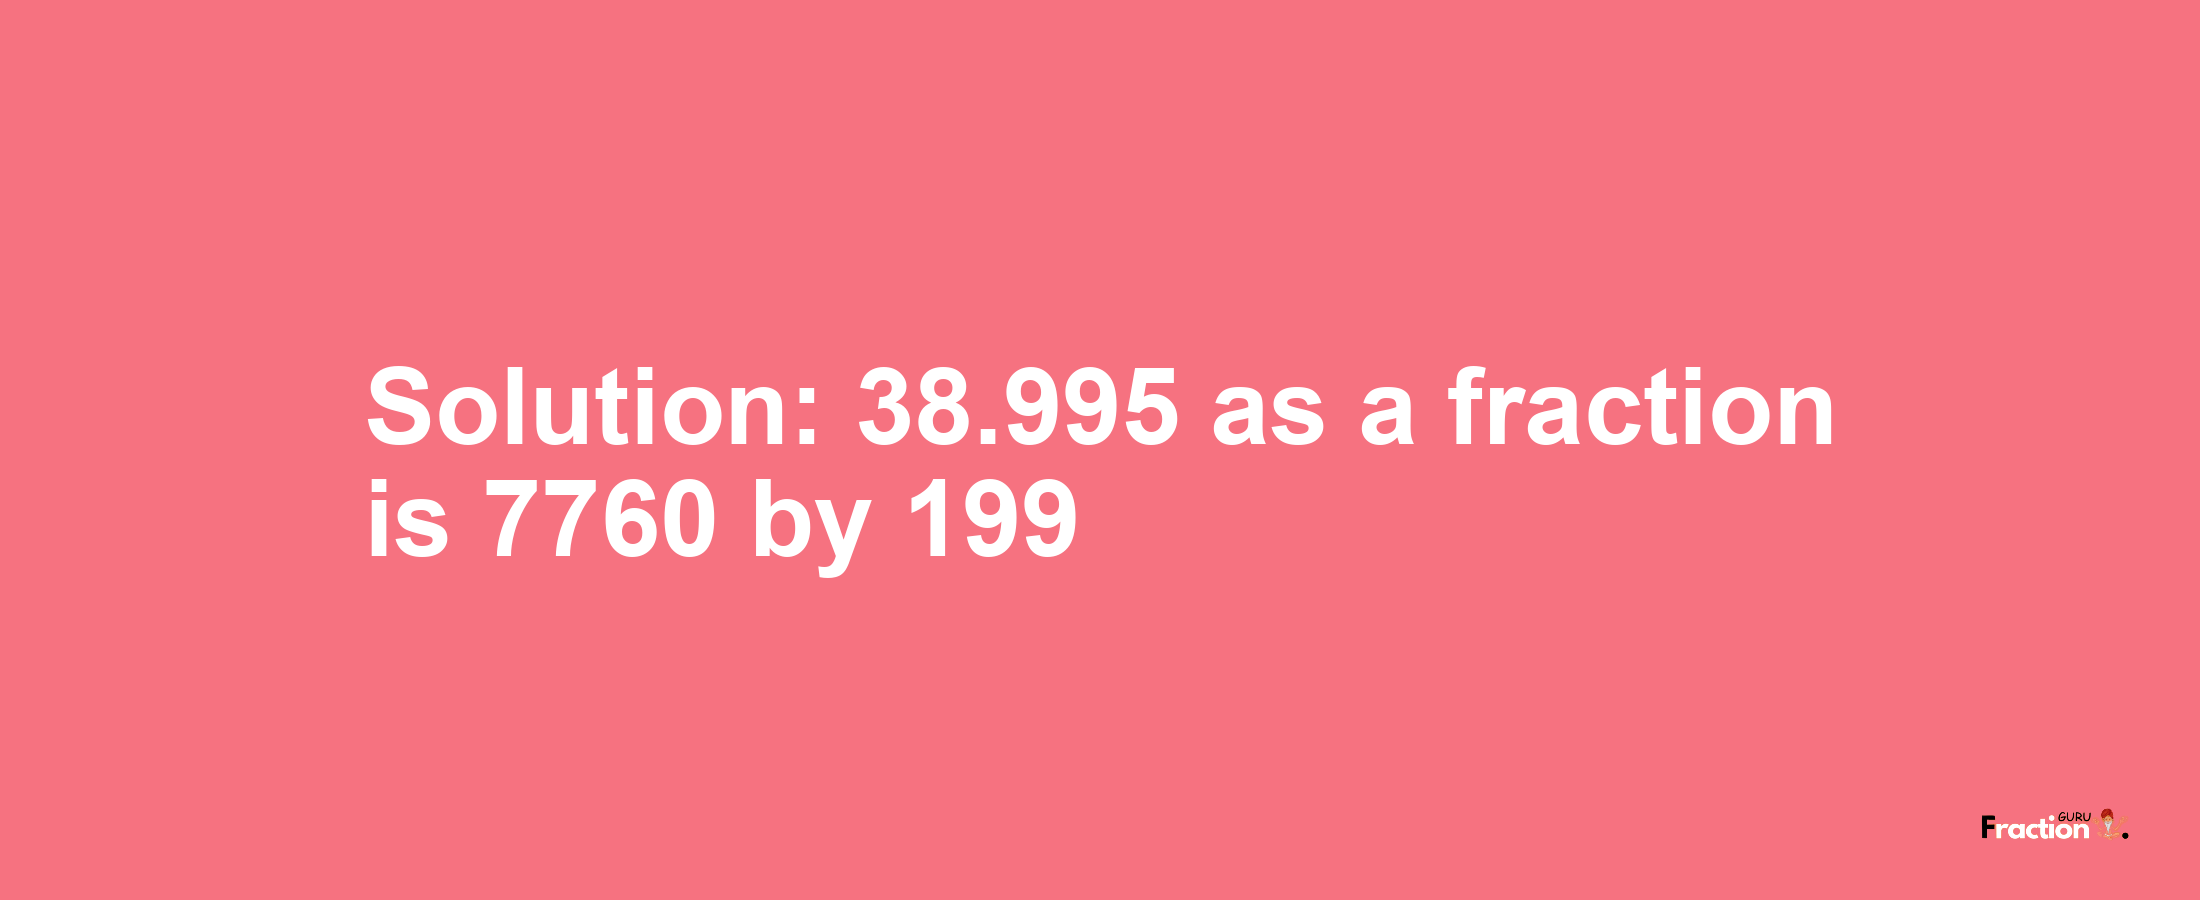 Solution:38.995 as a fraction is 7760/199